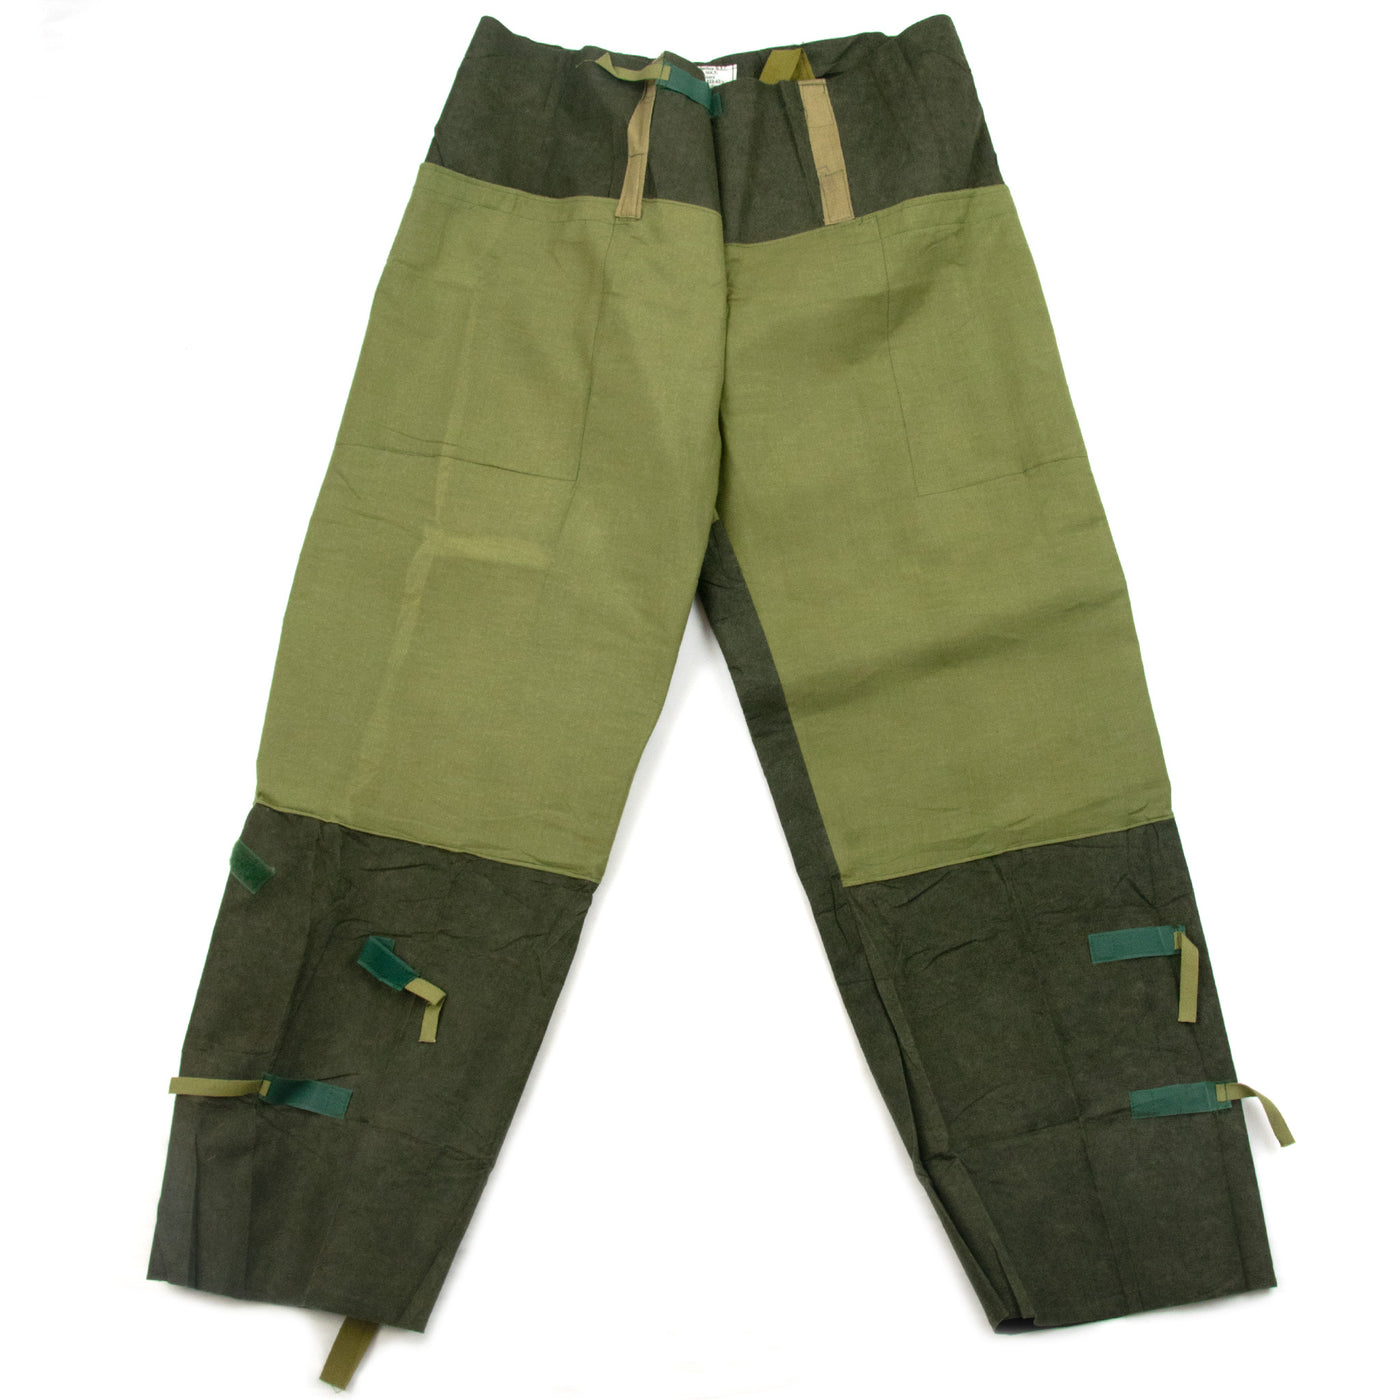 1970s Deadstock British Army Protective N.B.C Military Suit Mk.2 - M Trousers